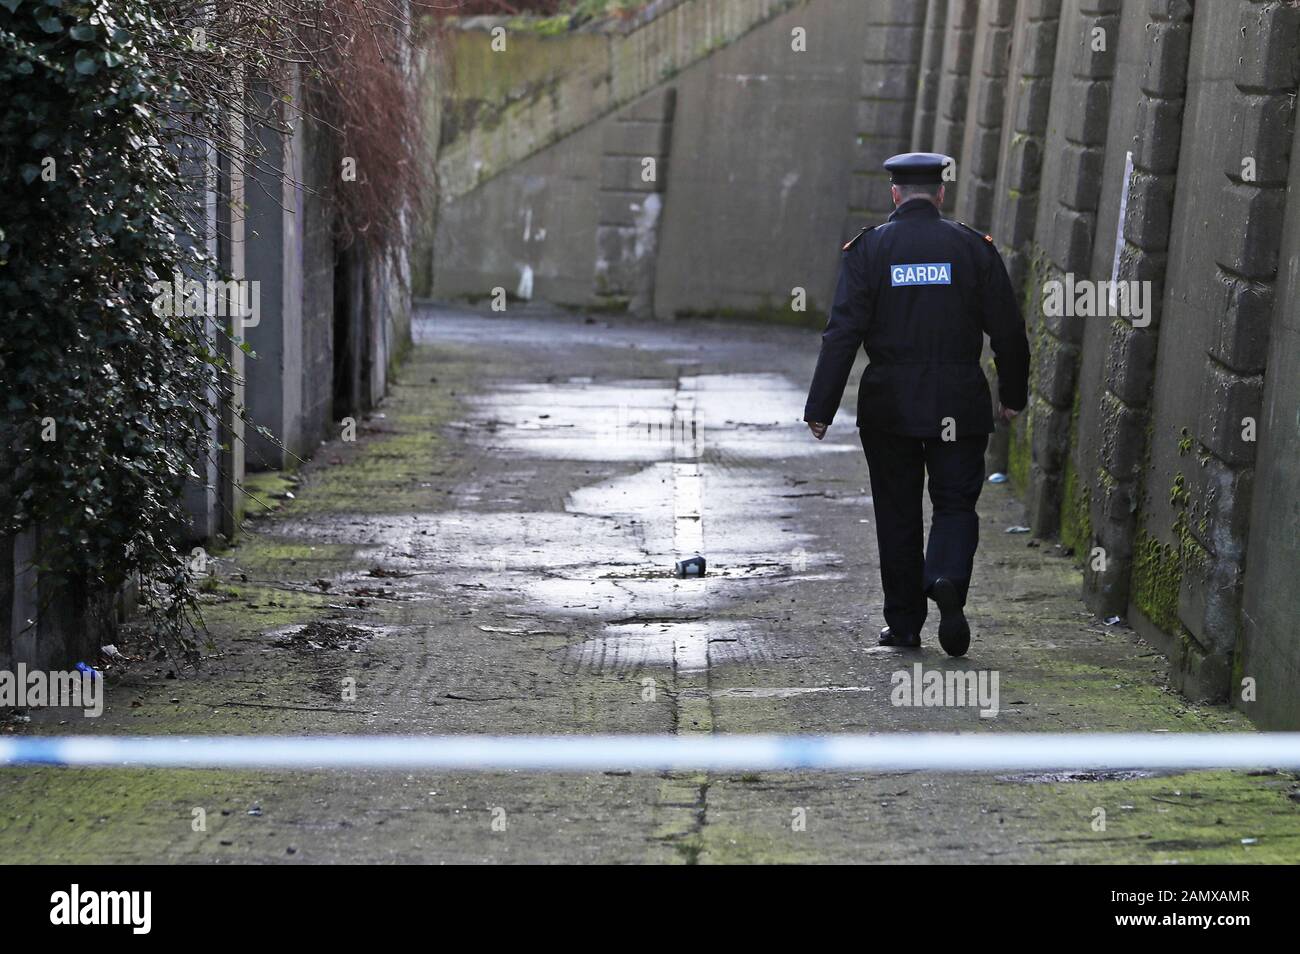 Gardai at the scene on Trinity Terrace in the Drumcondra area of Dublin where human remains, believed to be linked to the disappearance of a 17-year-old boy from Co Louth, have been found in a burnt out car. Gardai are awaiting DNA results to see if human limbs found in Coolock on Monday also belong to the missing teenager. Stock Photo